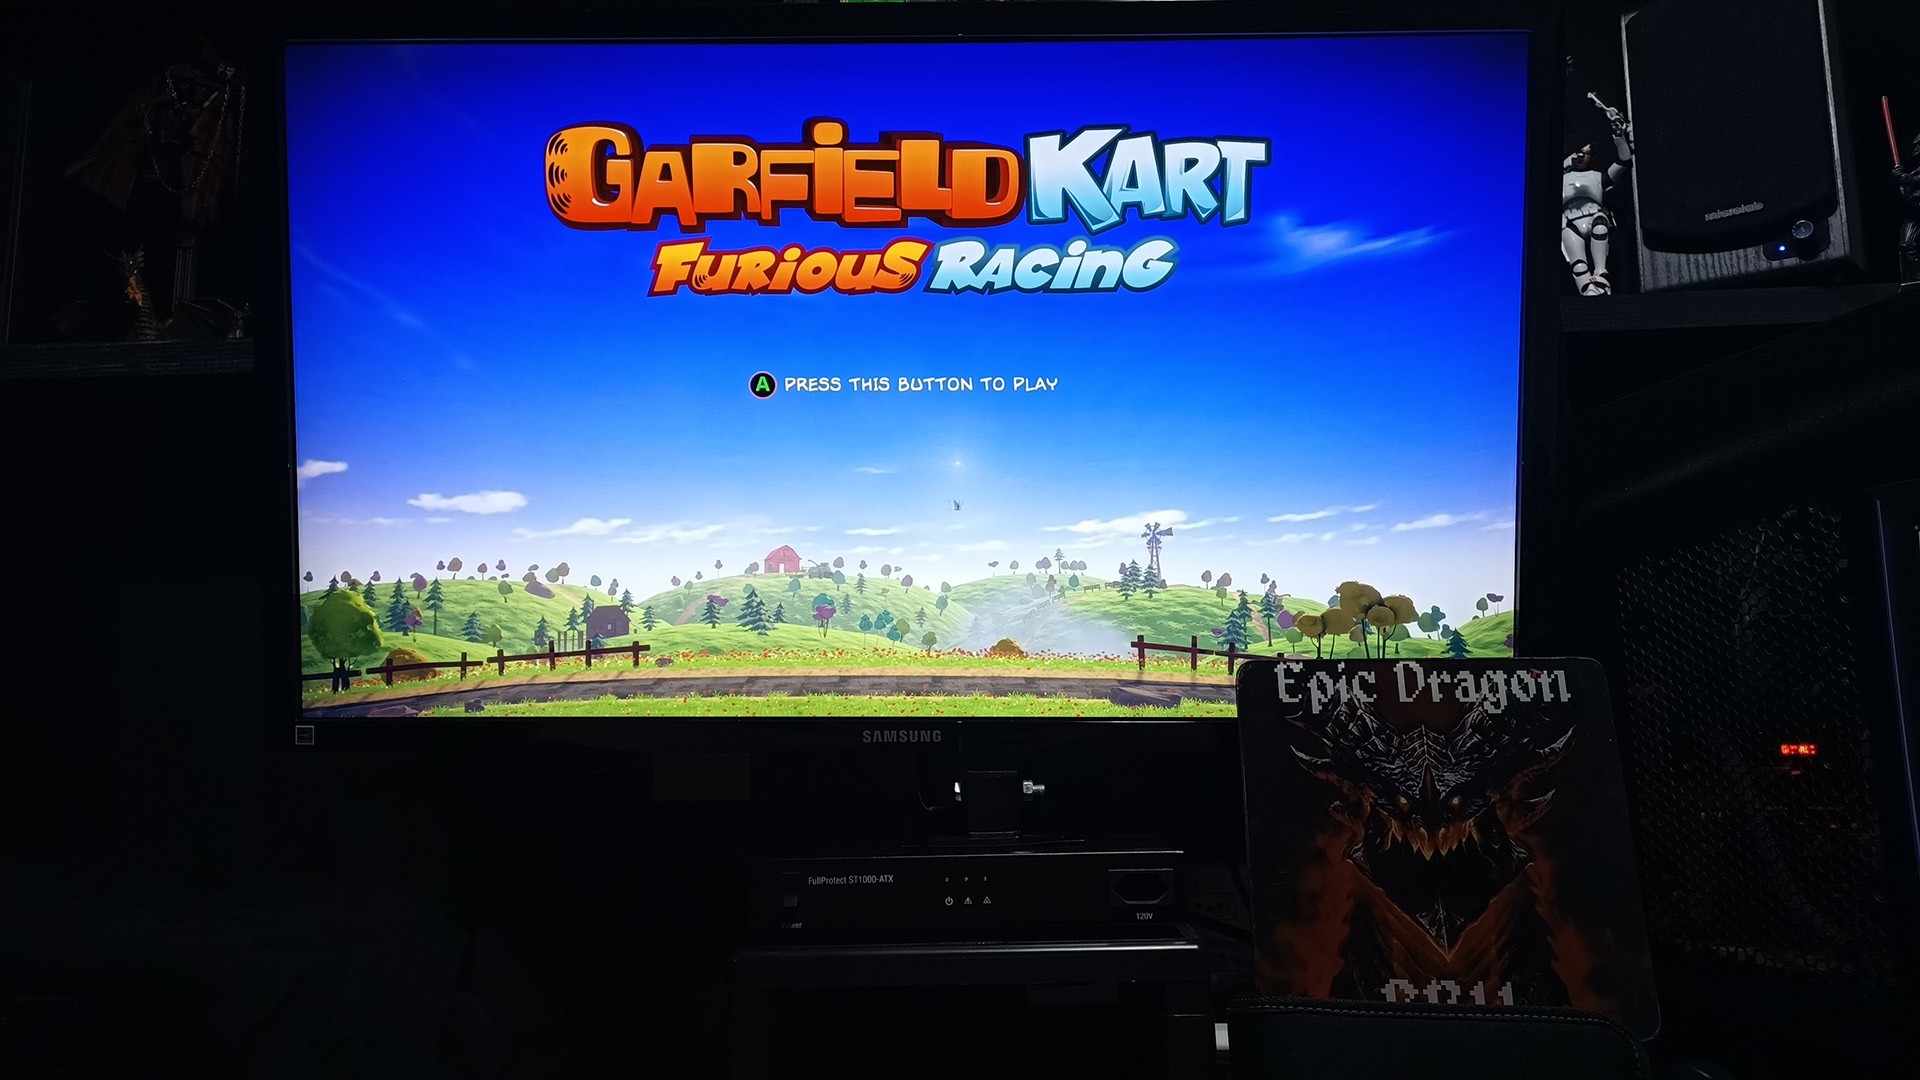 EpicDragon: Garfield Kart Furious Racing: Catz In The Hood [Time Trial: Lap Time] (PC) 0:00:25.55 points on 2022-08-05 17:27:15